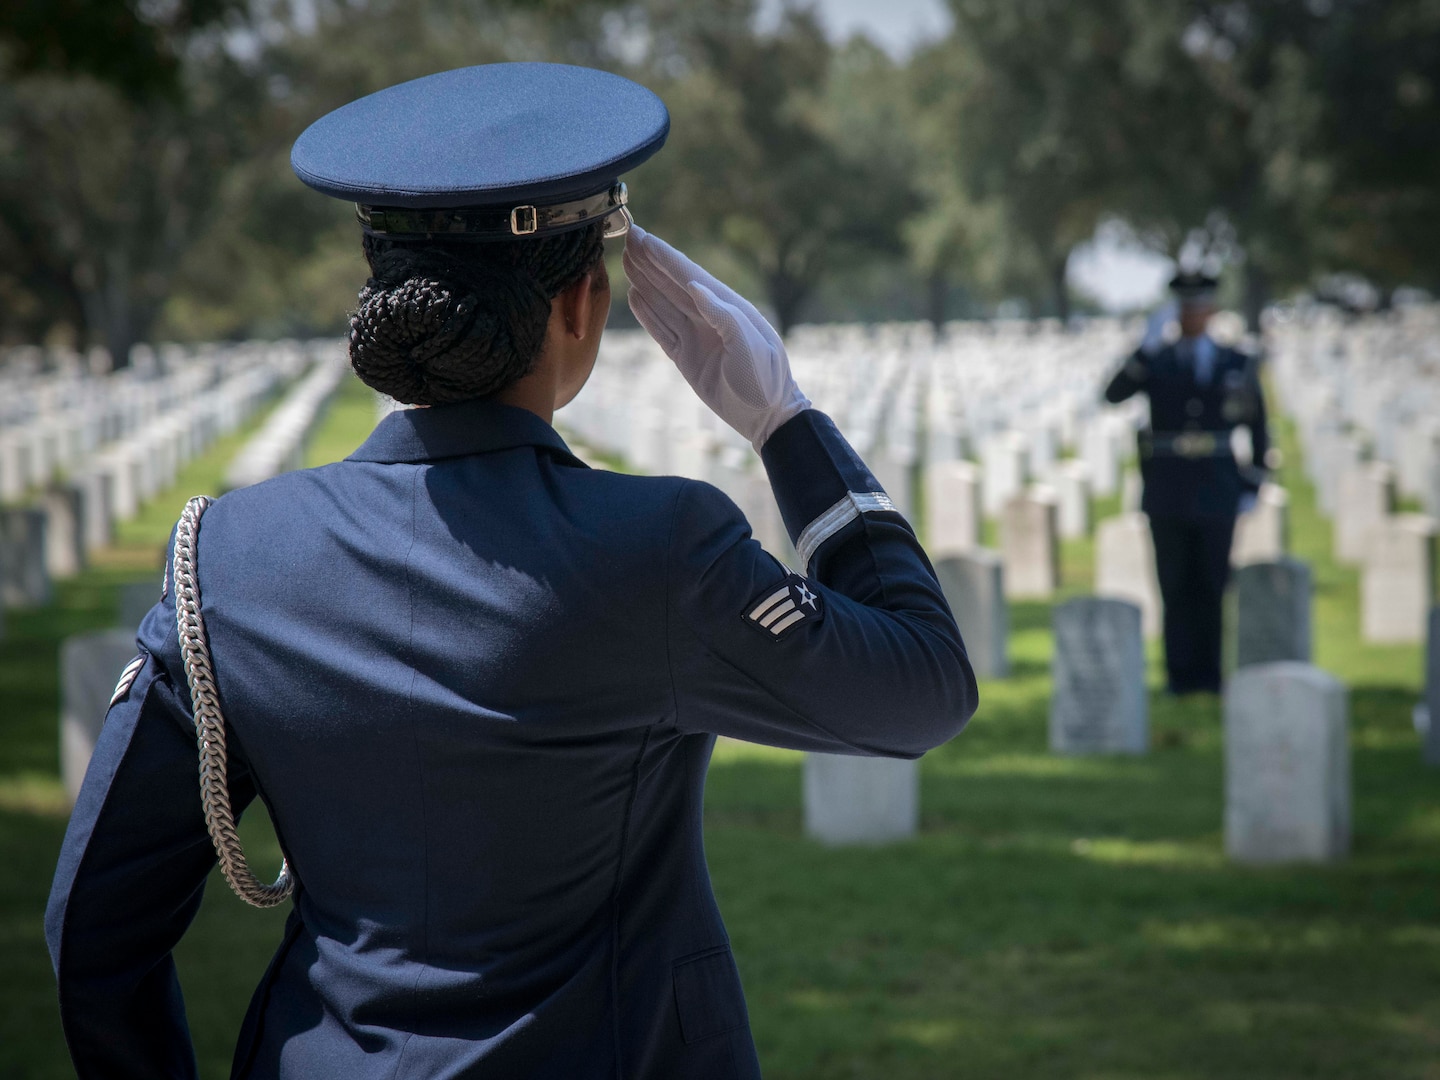 Senior Airman Chyna Roston, 559th Medical Squadron mental health technician, salutes another Joint Base Honor Guardsman while practicing for a funeral service Sept. 9, 2019 at the Fort Sam Houston National Cemetery. Before each service performed by JBSA Honor Guard, the detail arrives early to practice the service to ensure perfection before performing in front of the family. (U.S. Air Force photo by: Airman 1st Class Shelby Pruitt)